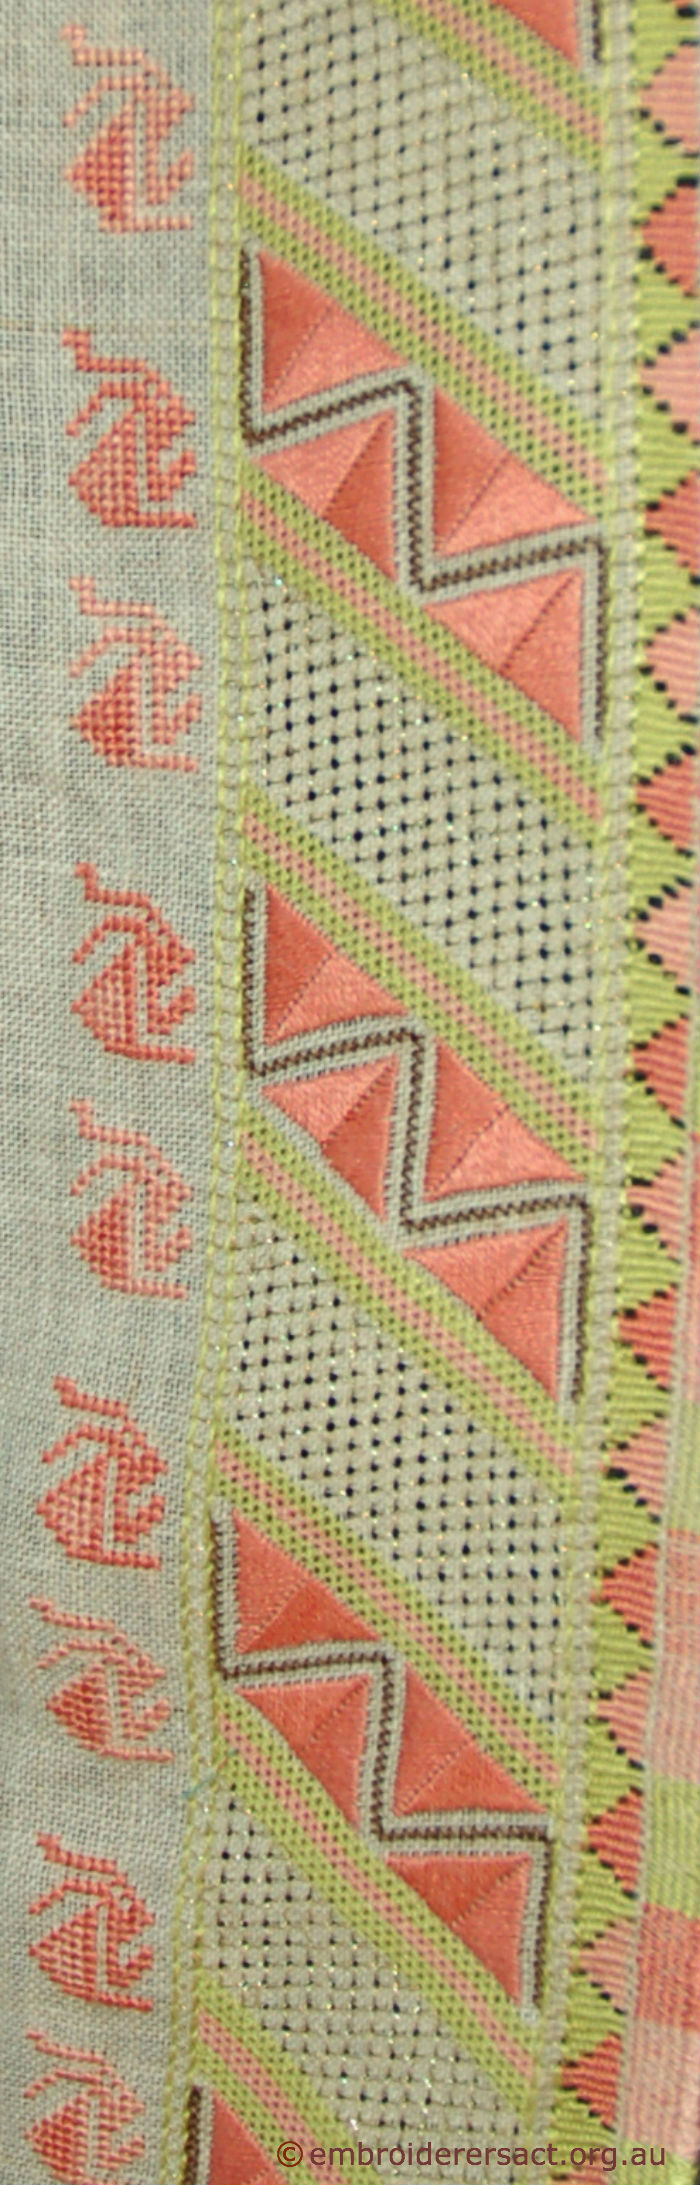 Detail of Thracian Embroidery stitched by Polly Templeton